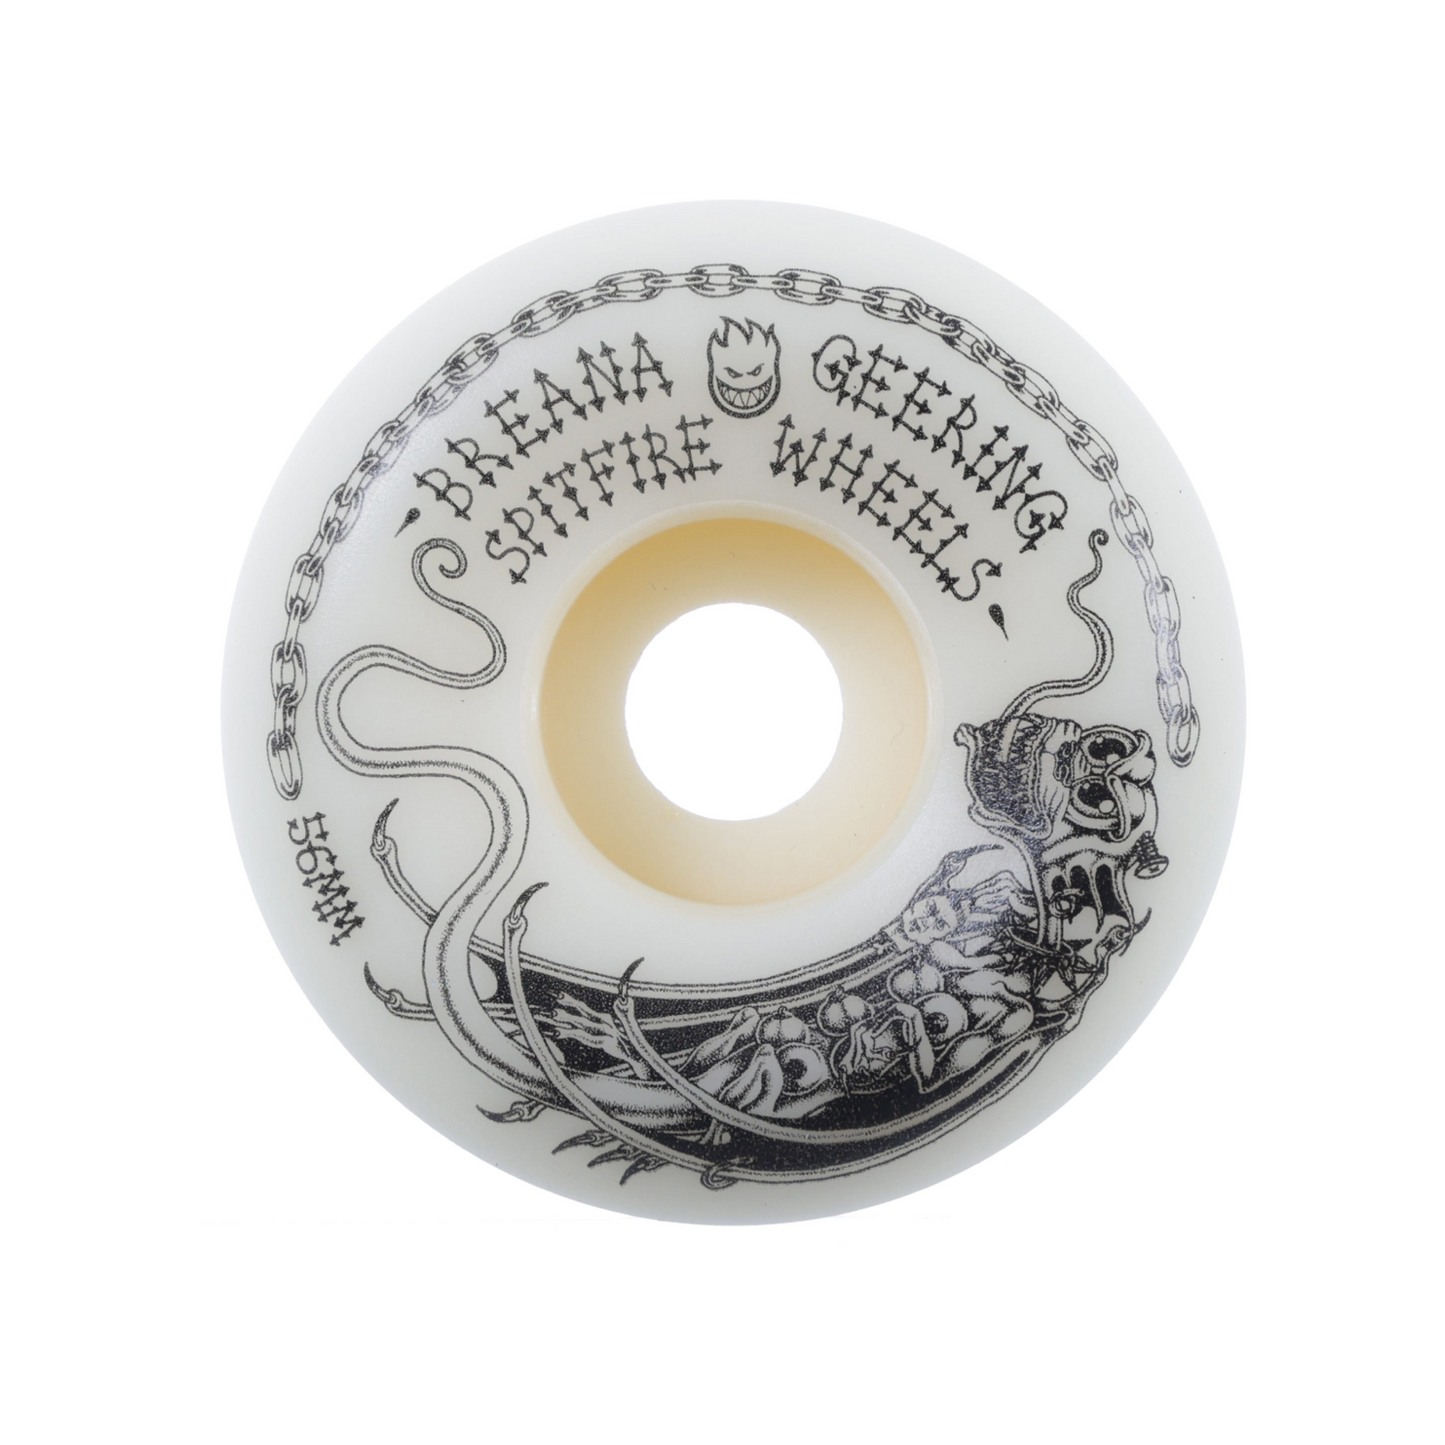 SPITFIRE GEERING FORMULA FOUR 99 FULL CONICAL WHEELS 56MM